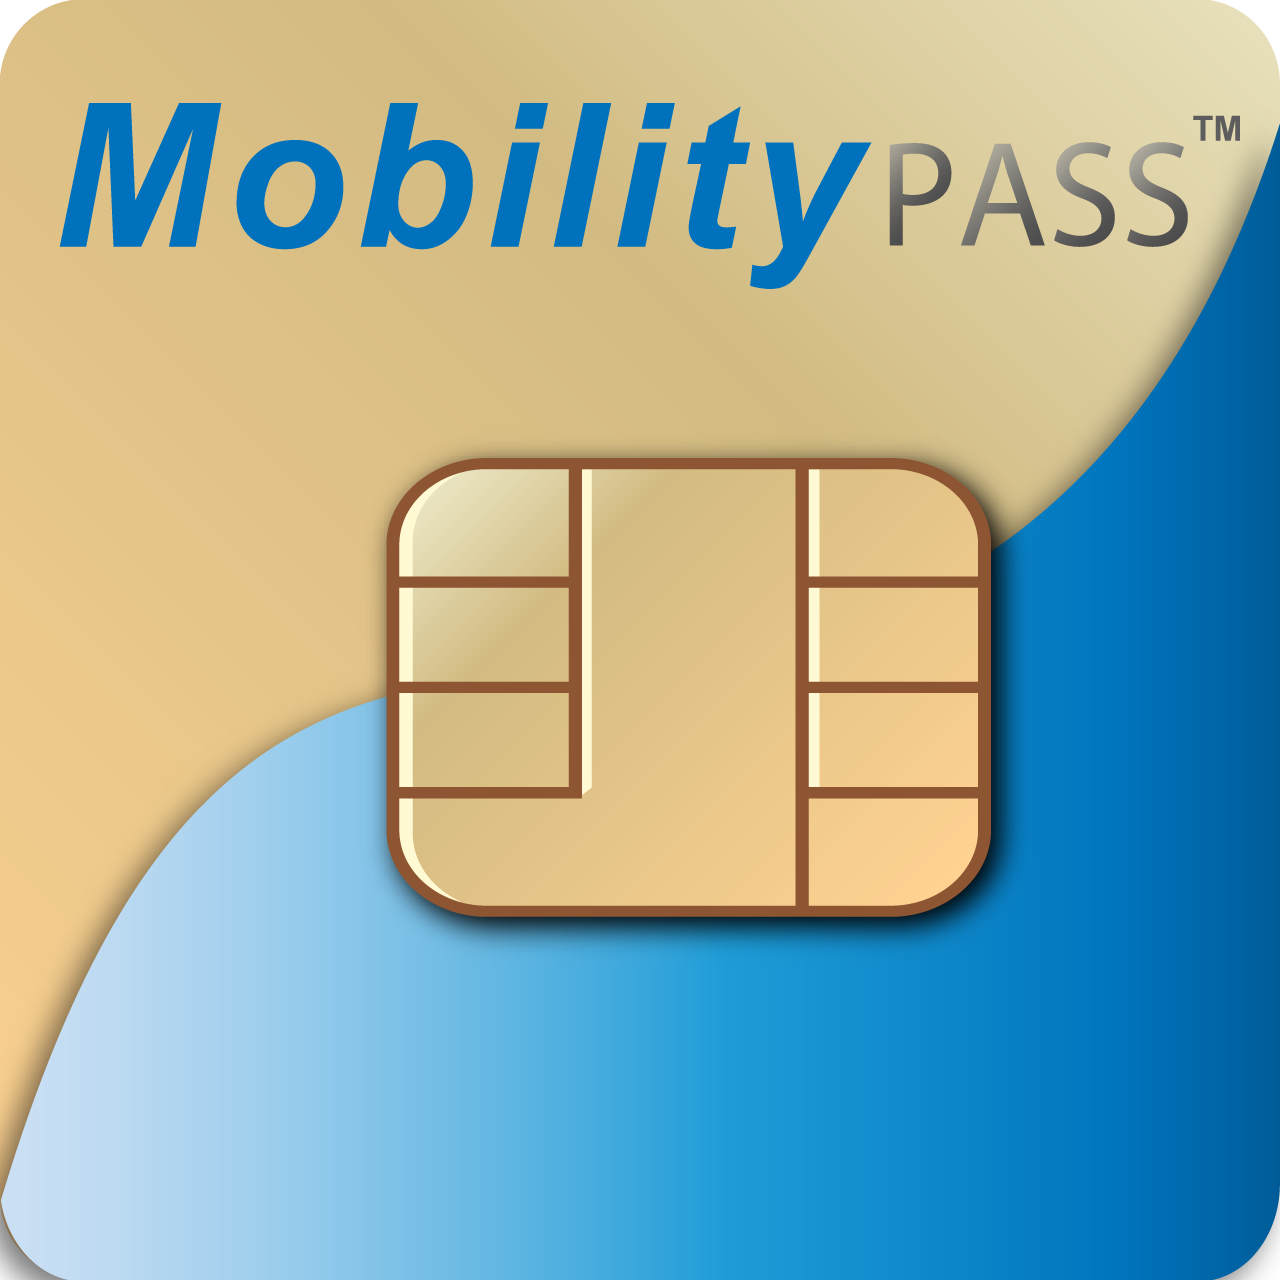 MobilityPass Prepaid official web